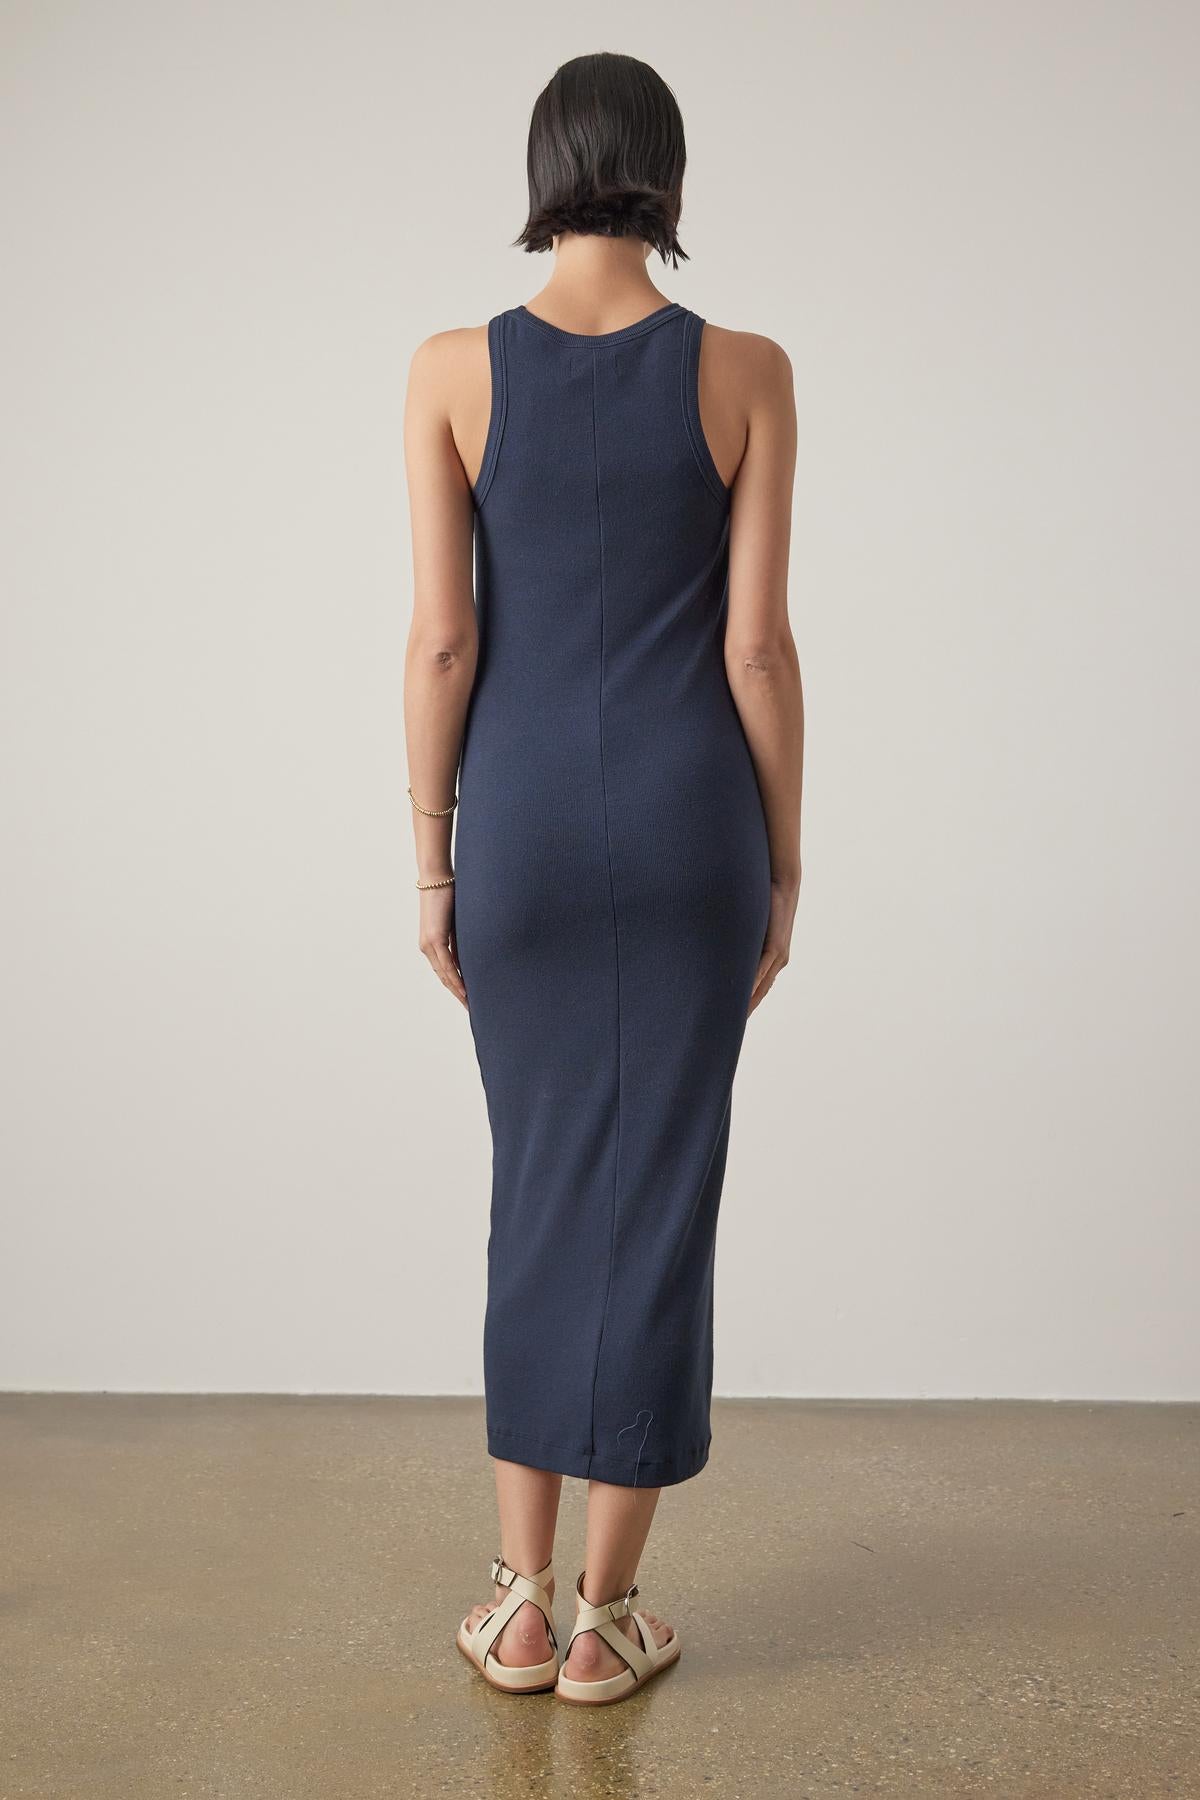 Rear view of a woman in a Navy Blue Velvet by Jenny Graham Griffith Dress with a crew neckline and cream sandals standing against a plain background.-36863292735681